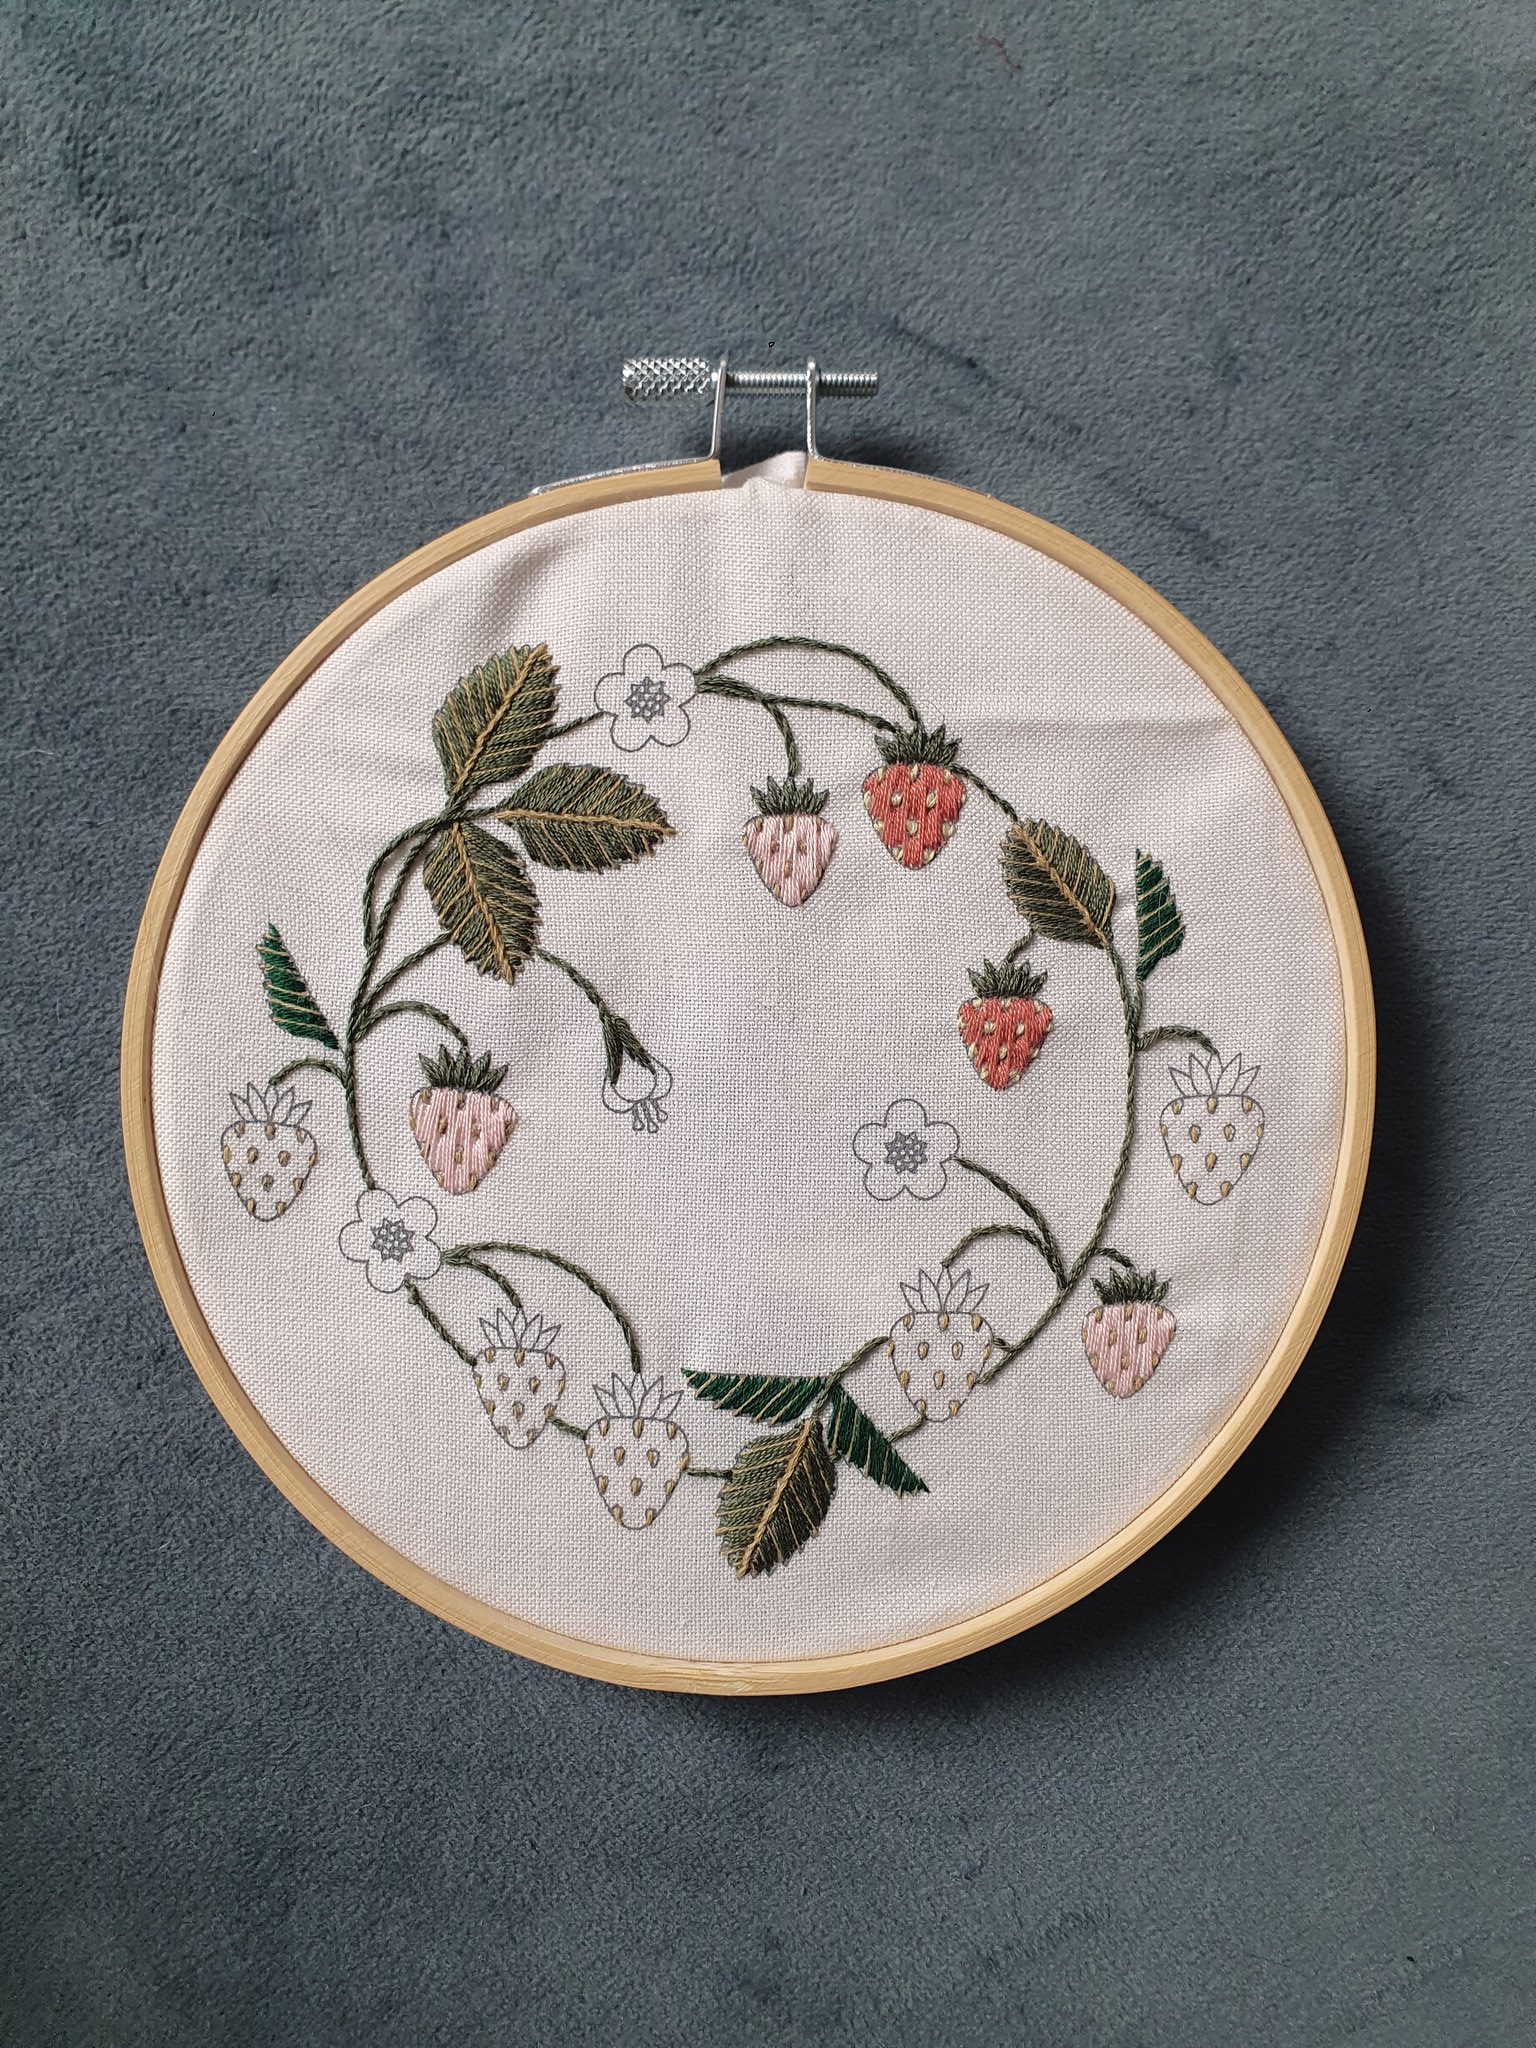 Embroidery and Strawberries